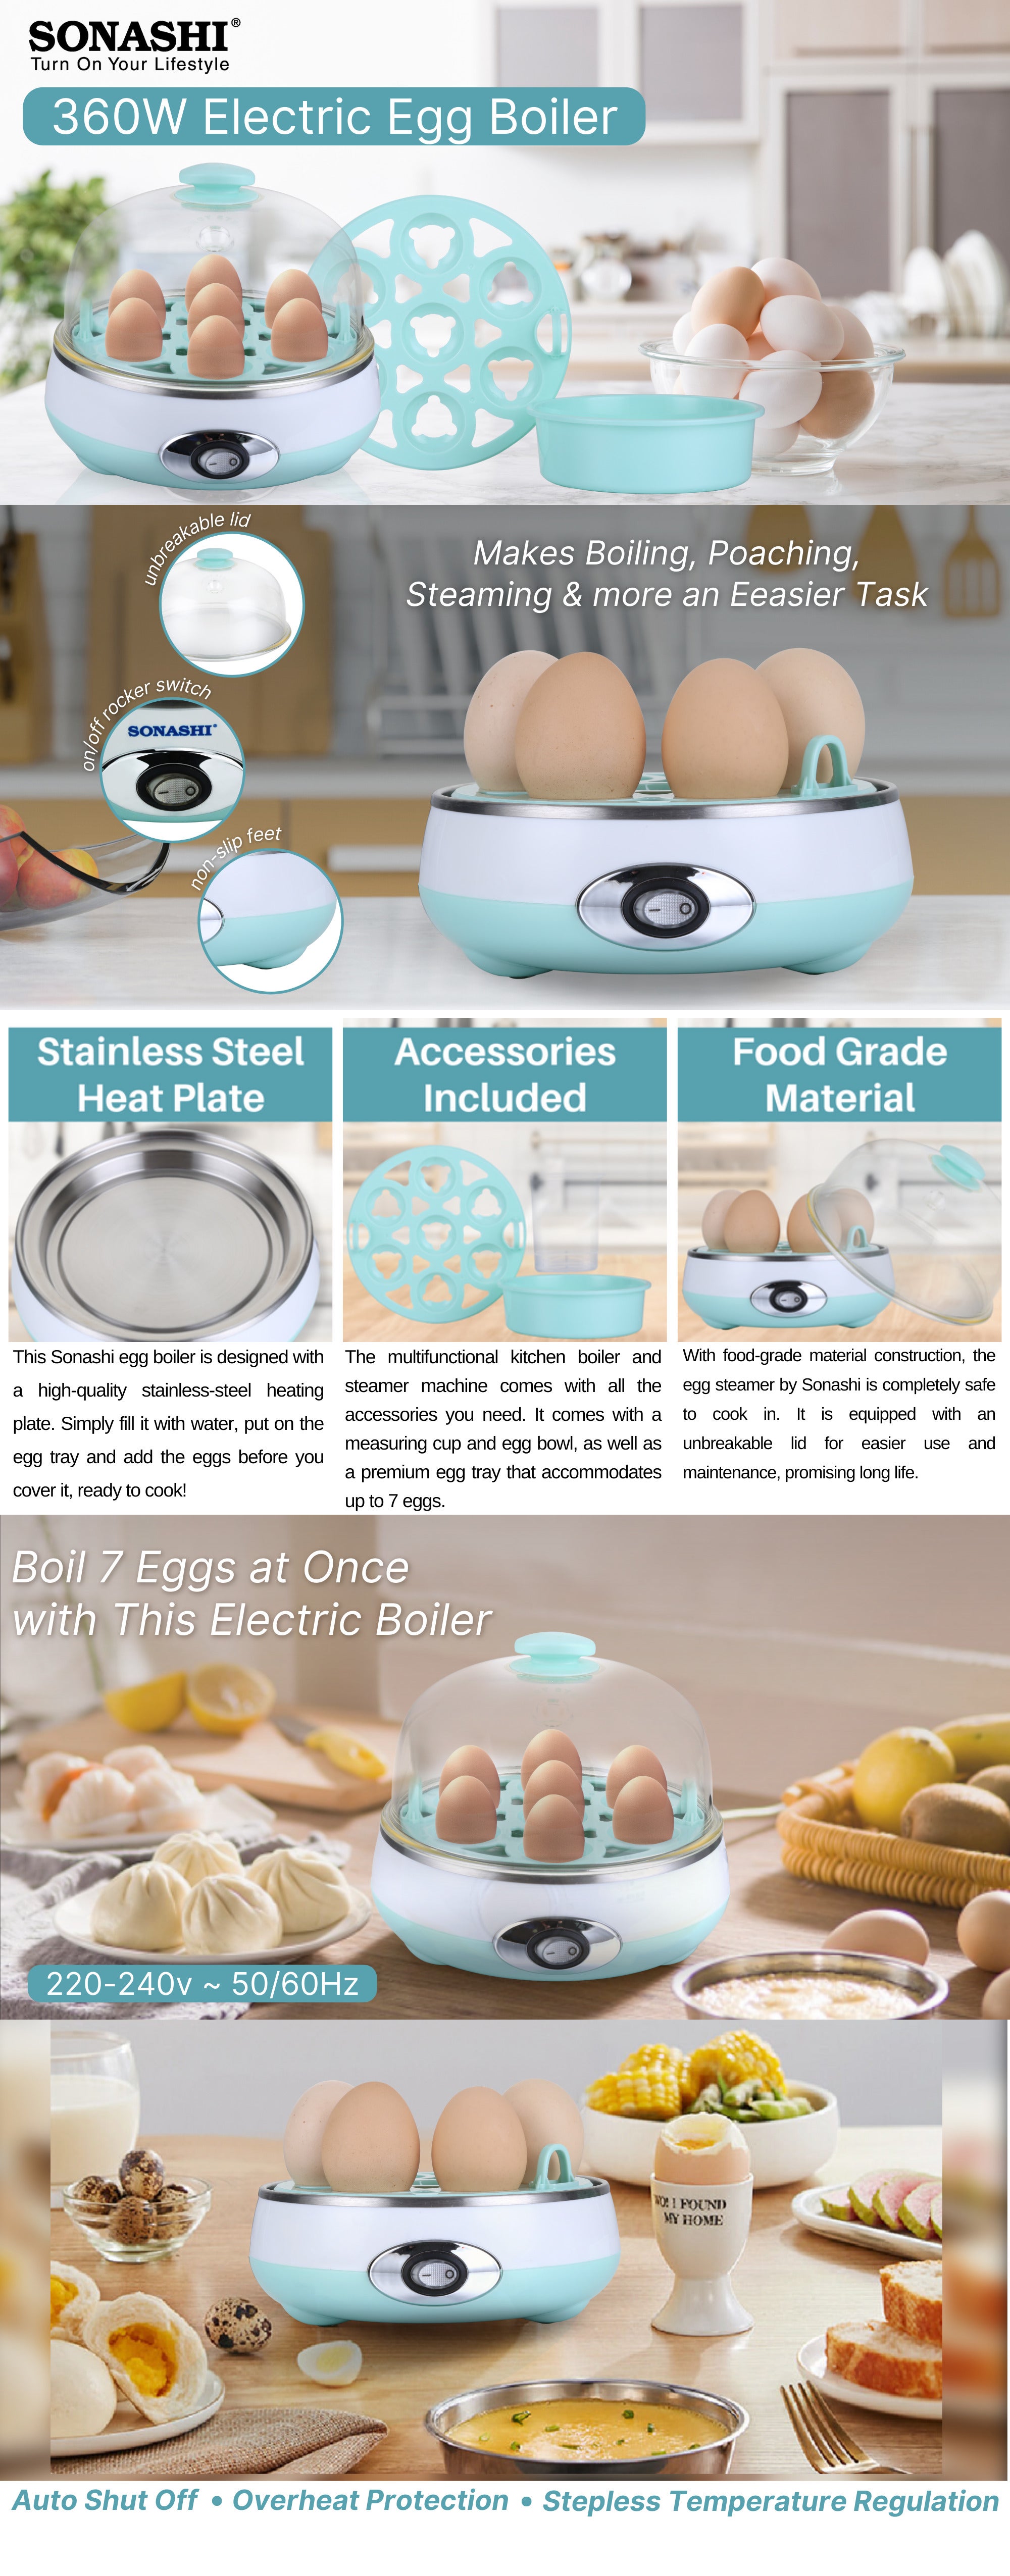 Electrical Egg Boiler - Cooks 7 Eggs at one time | Stainless-Steel Heating Plate with Unbreakable Cover, Measuring Cup and Egg Bowl | Food Grade Material 360 W SEB-77 Blue